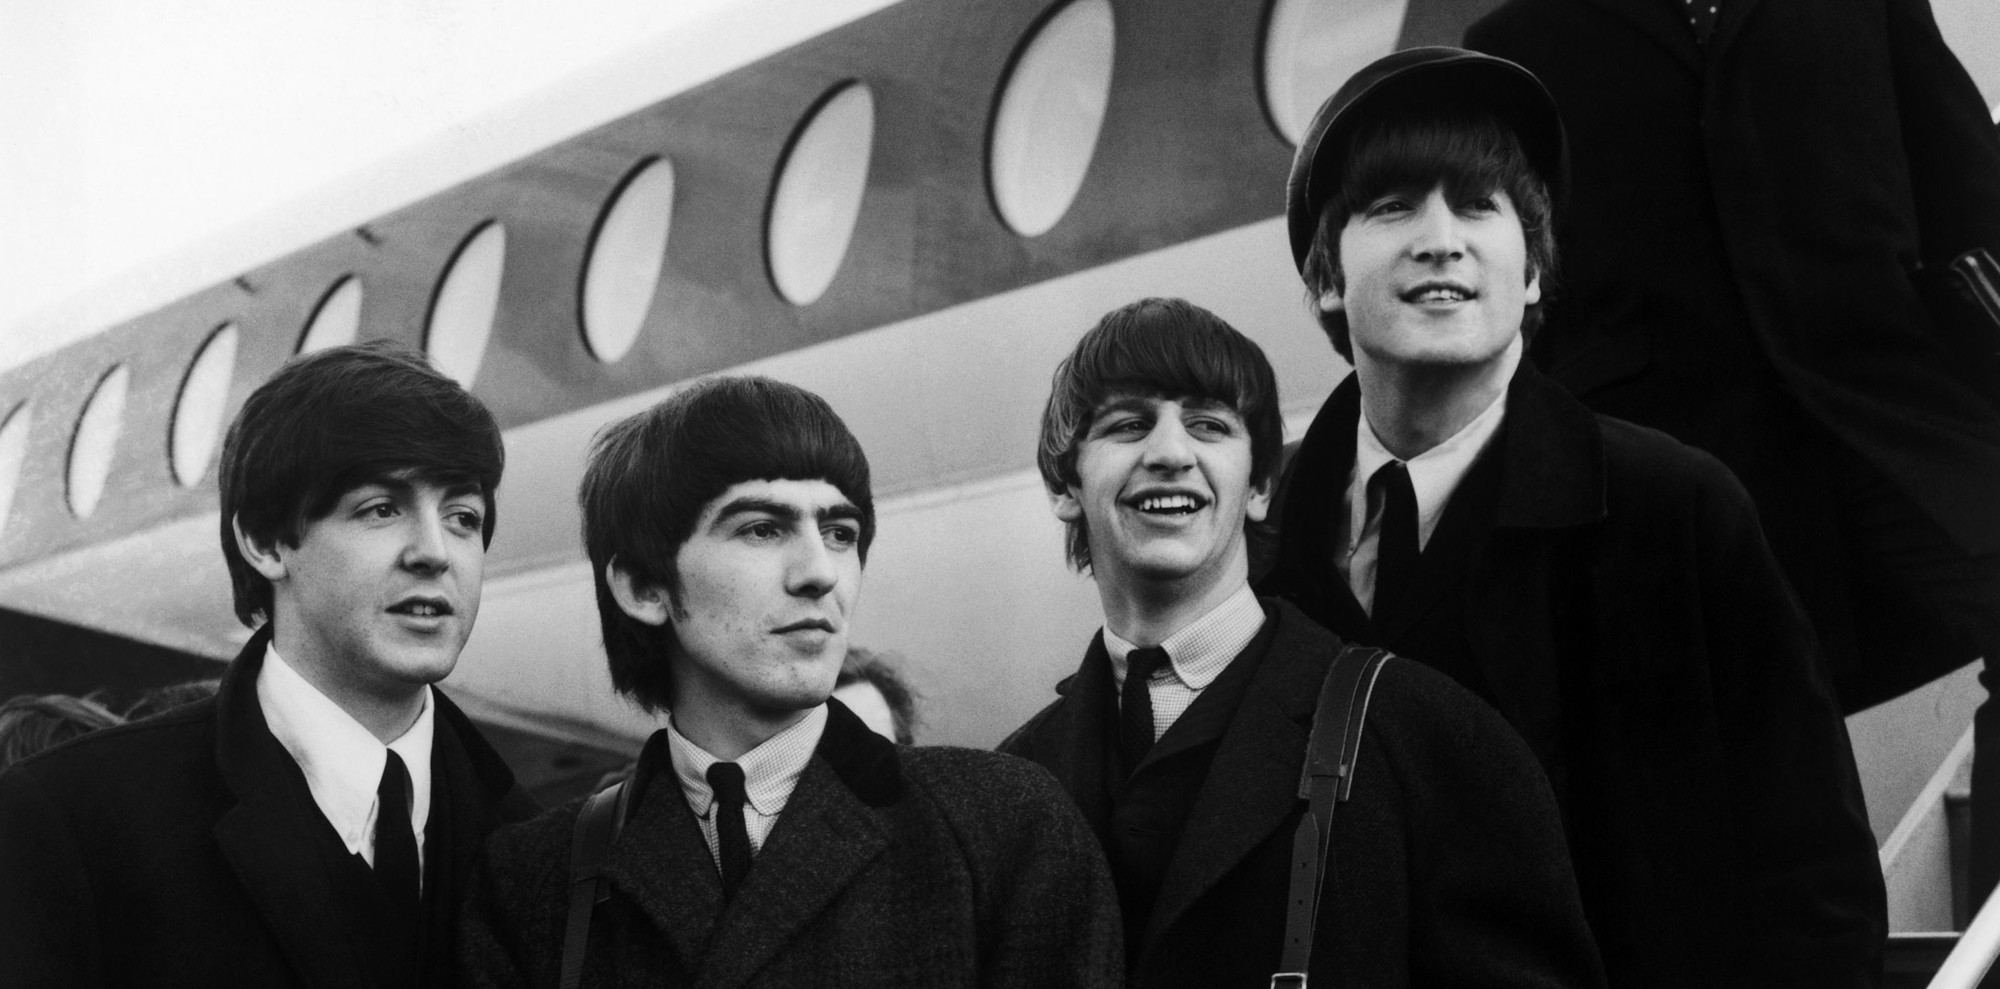 When the Beatles Finally Got Political With Revolution